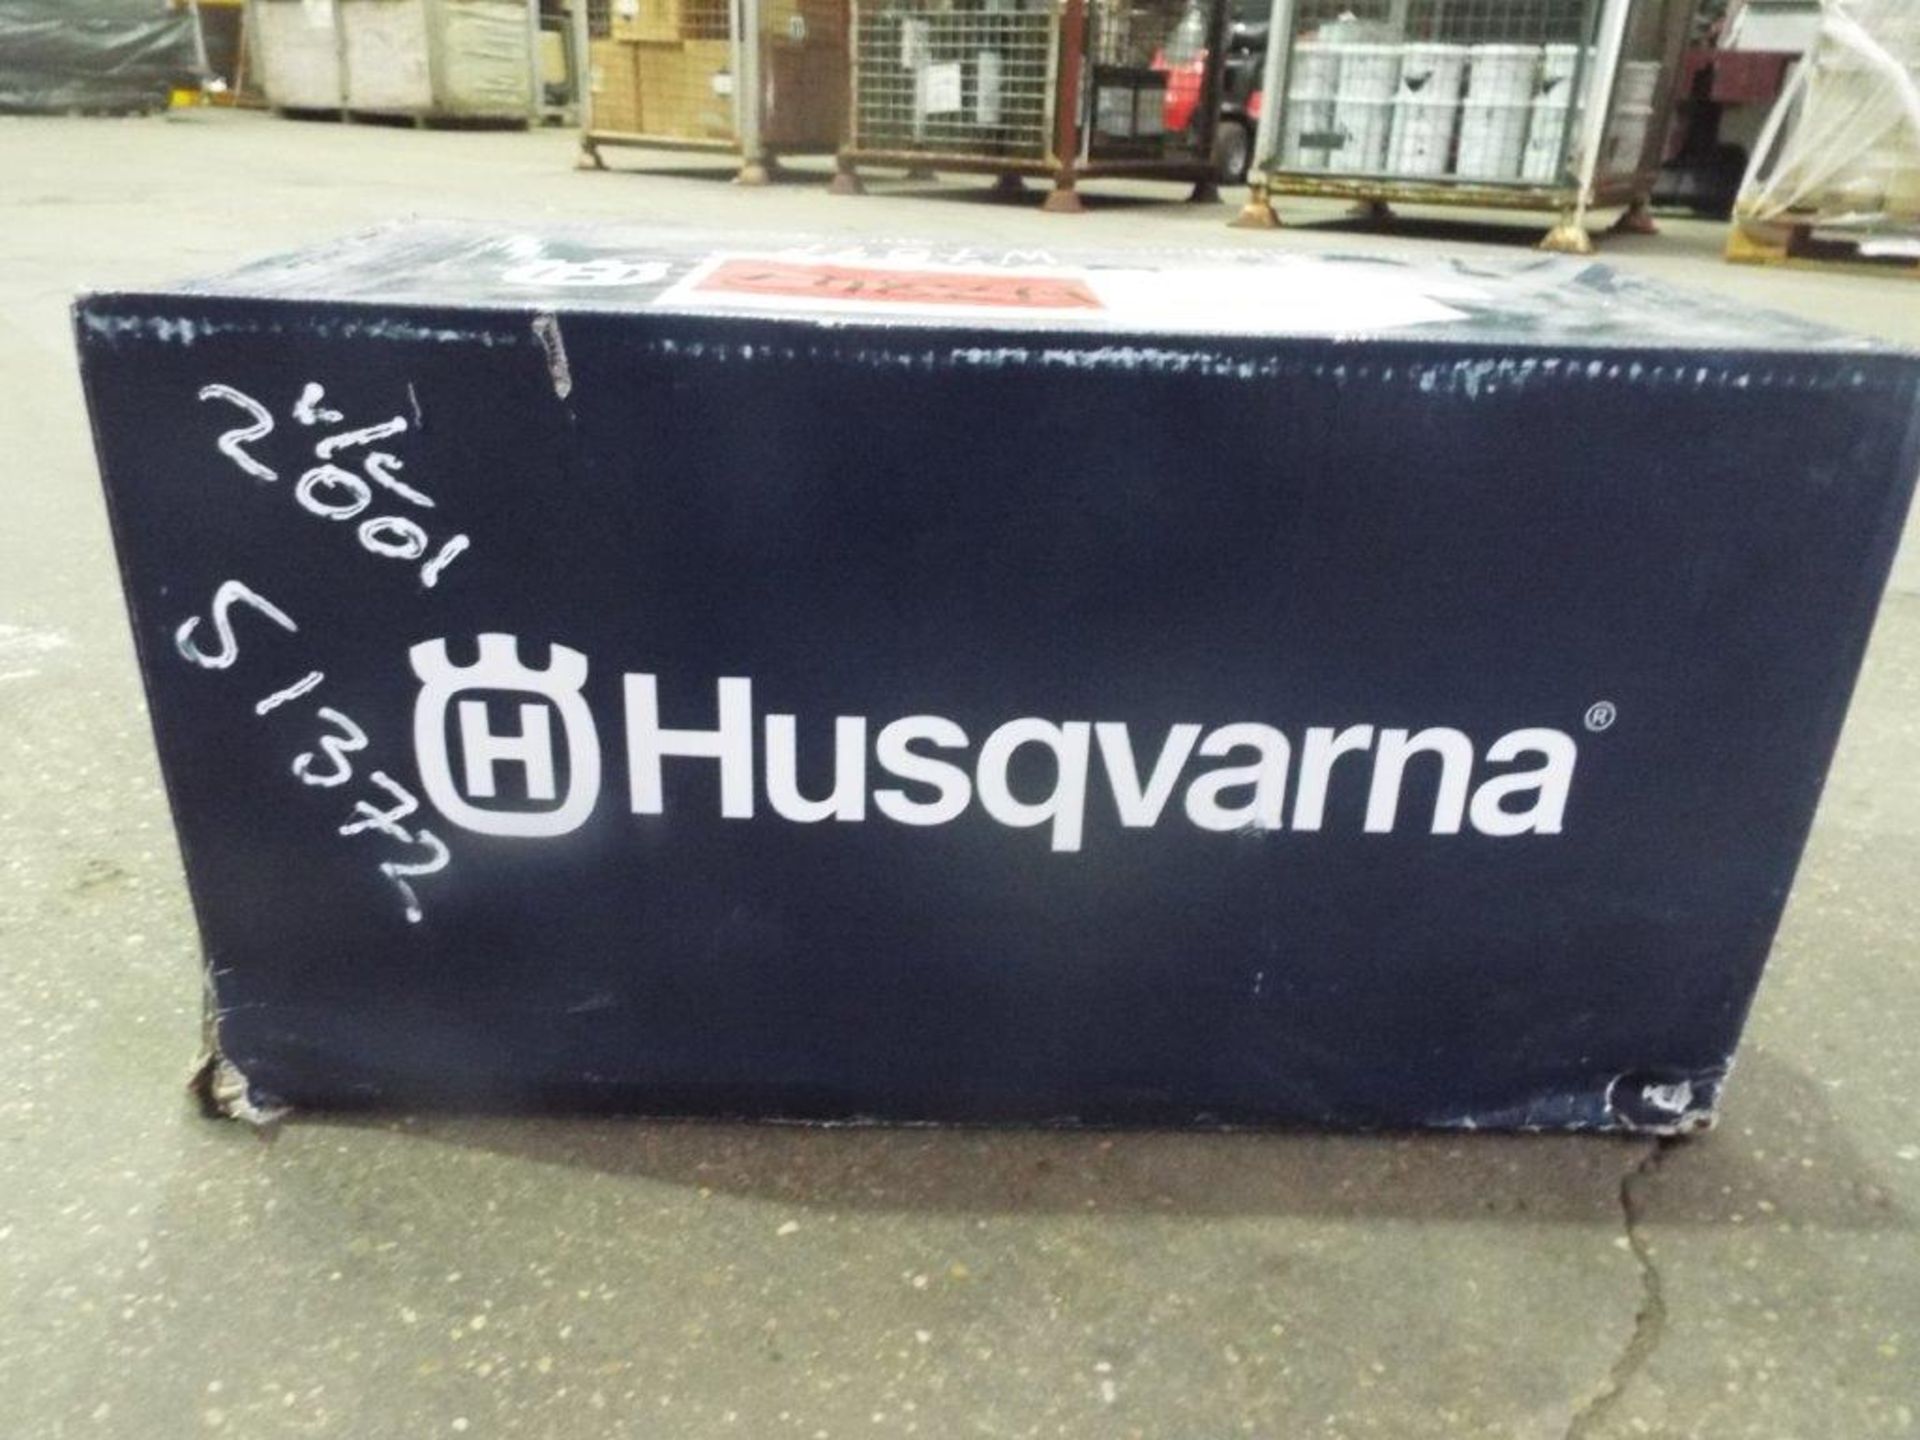 New Unused Husqvarna 236 Chainsaw with 14" Blade - Image 4 of 5